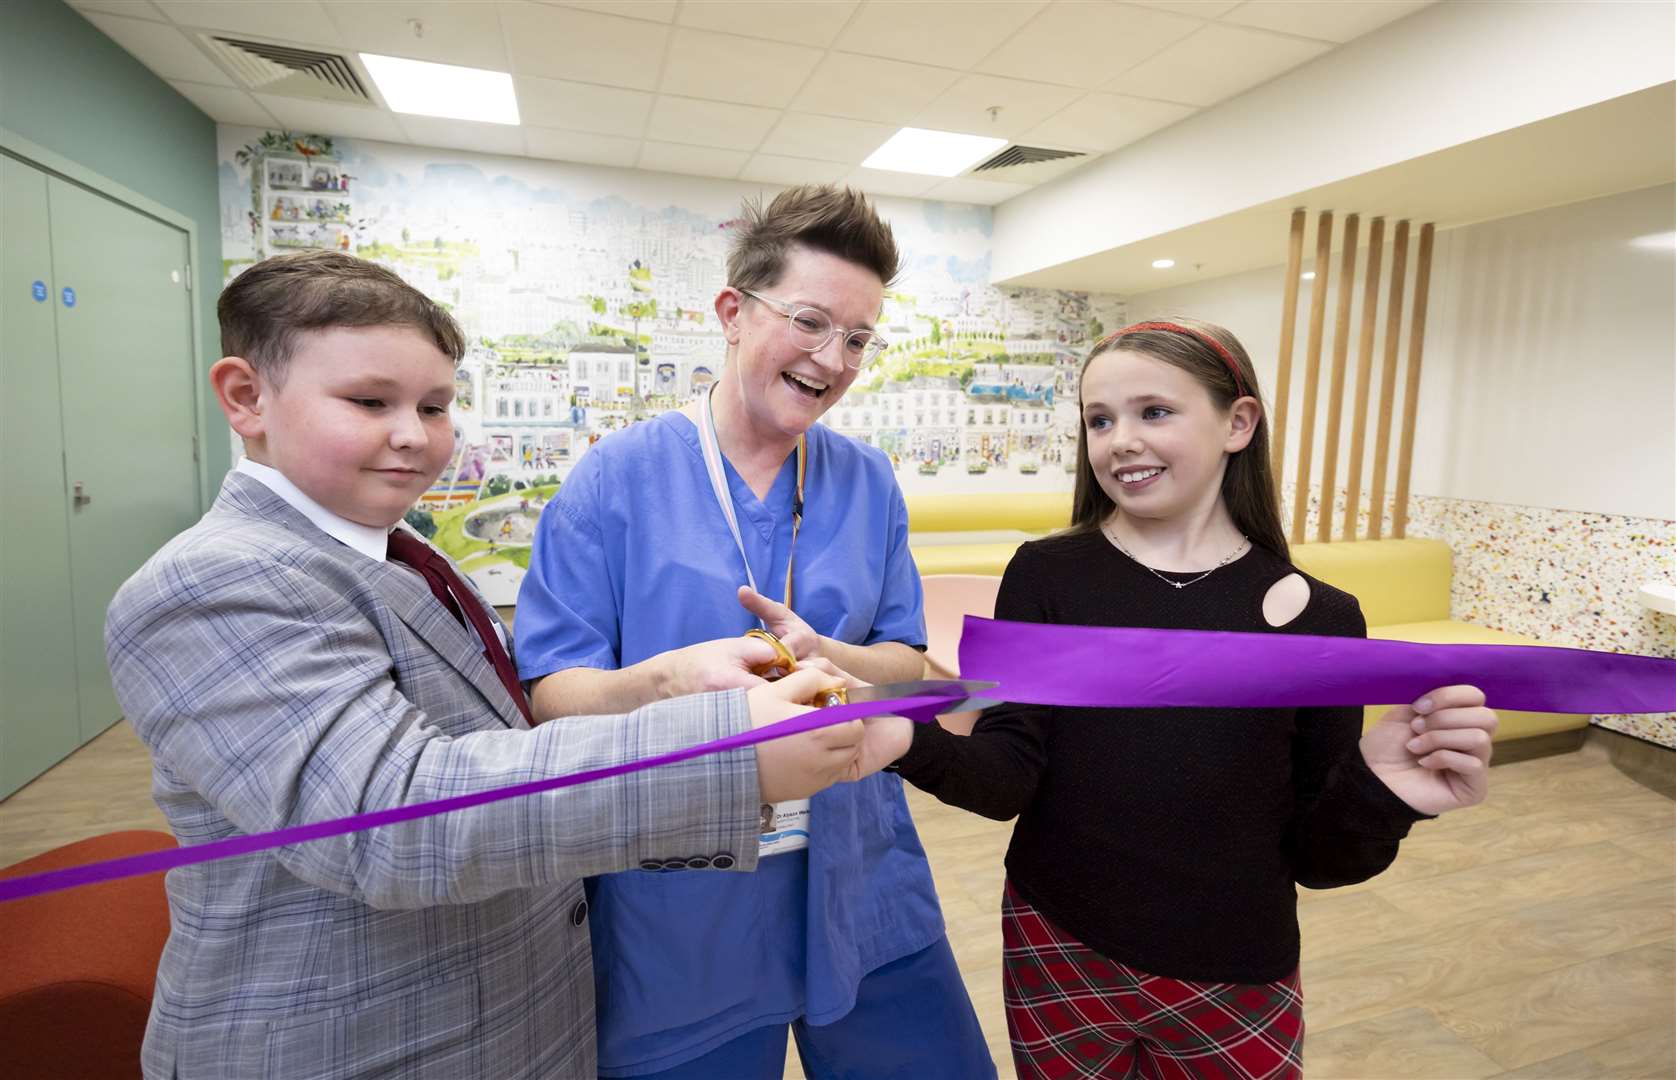 Dr Alyson Walker cutting the ribbon with Riley McLennan, (9), and Scarlett Dougan, (12) in Glasgow . Photograph by Martin Shields